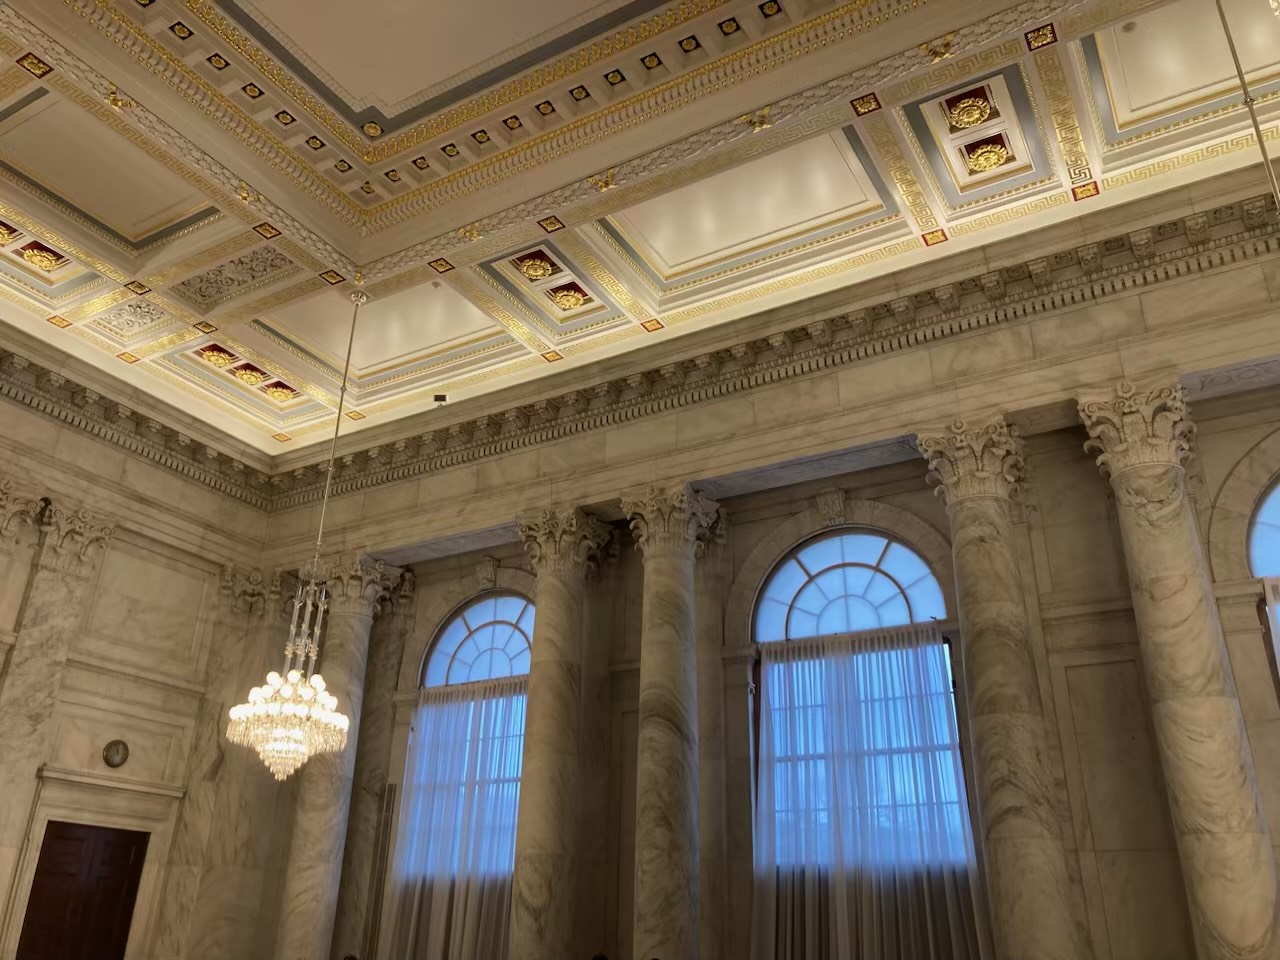 One of the rooms within the cUnited States Capital showing the architecture of the building. 